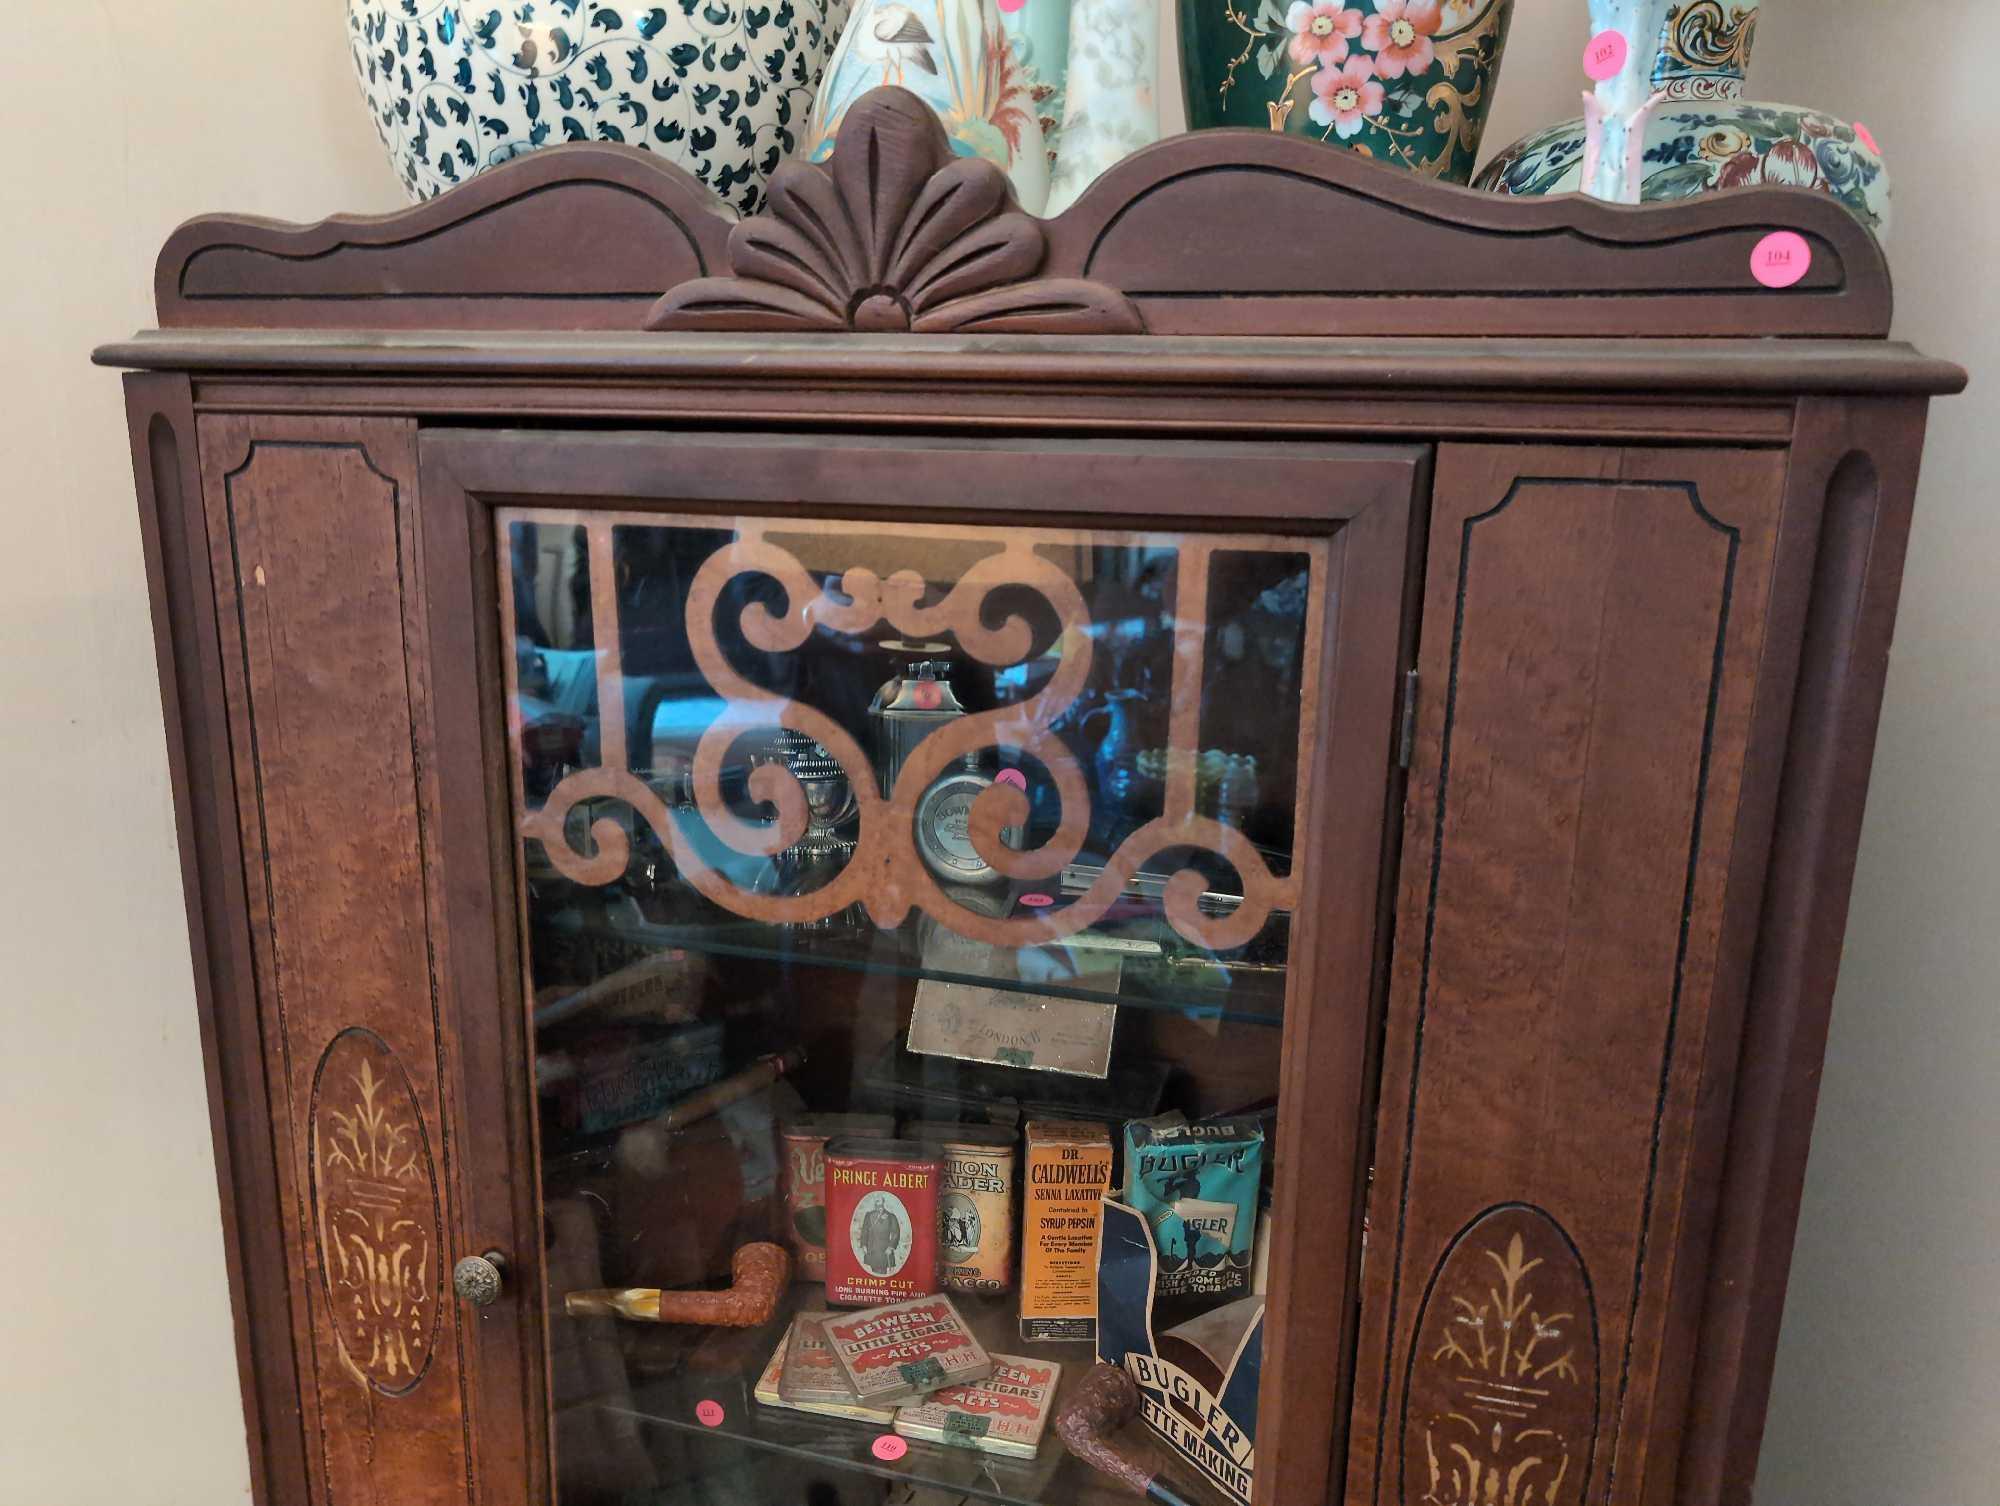 (LR) ANTIQUE WOOD GLASS FRONT CHINA CABINET WITH CROSS STRETCHER BASE, INLAID DETAILS, VENEER SCROLL